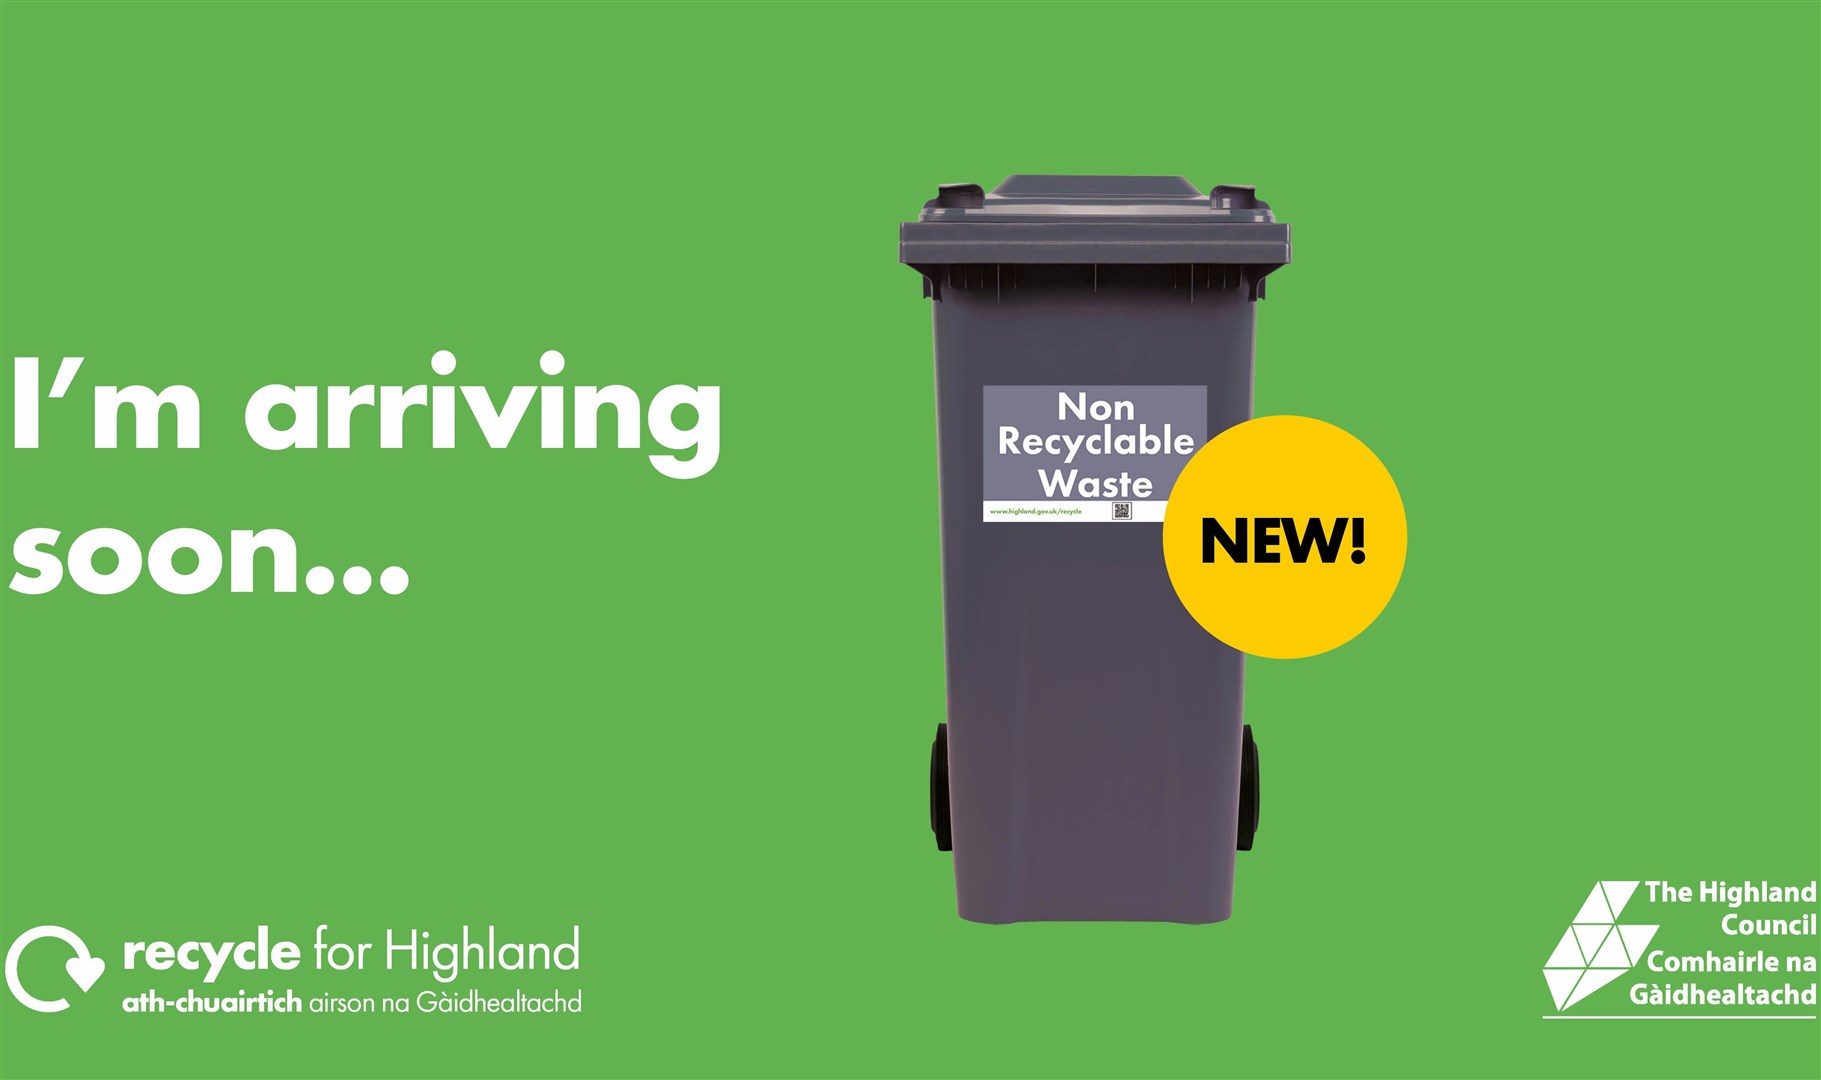 New bins are being delivered along with instructions about the plan of action for households as twin stream recycling is introduced.